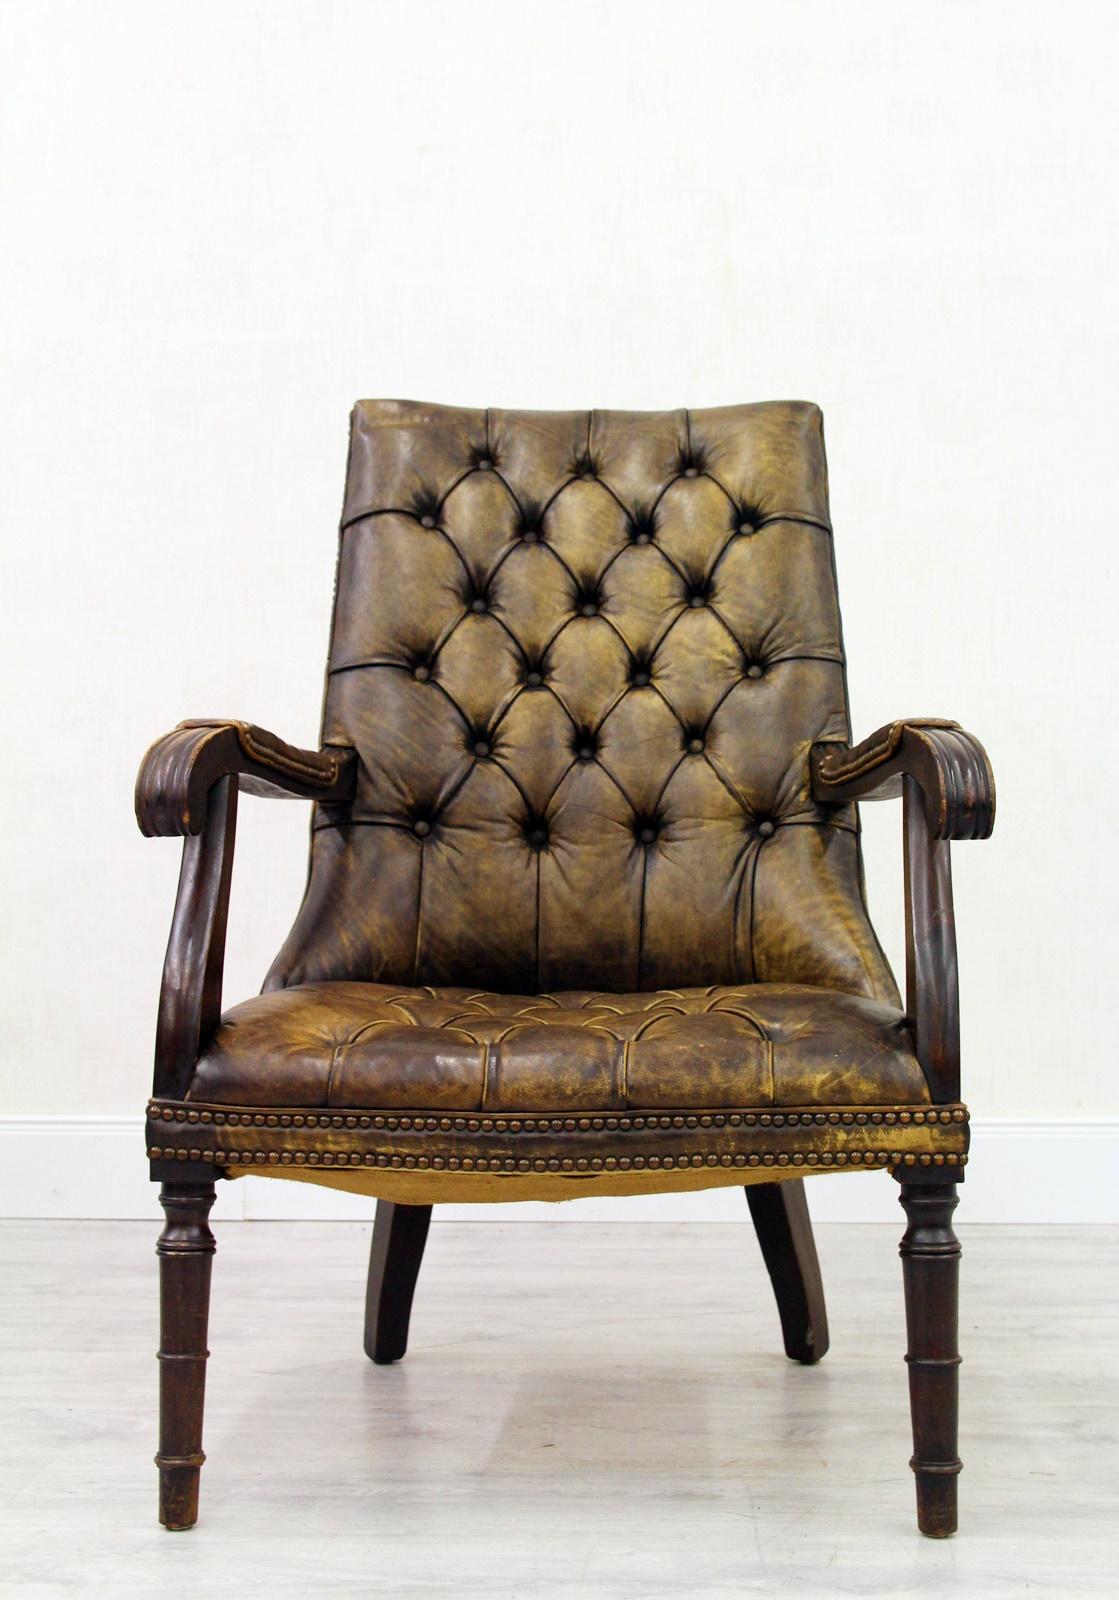 4 Chesterfield Chippendale Wing Chair Armchair Baroque Antique In Good Condition For Sale In Lage, DE